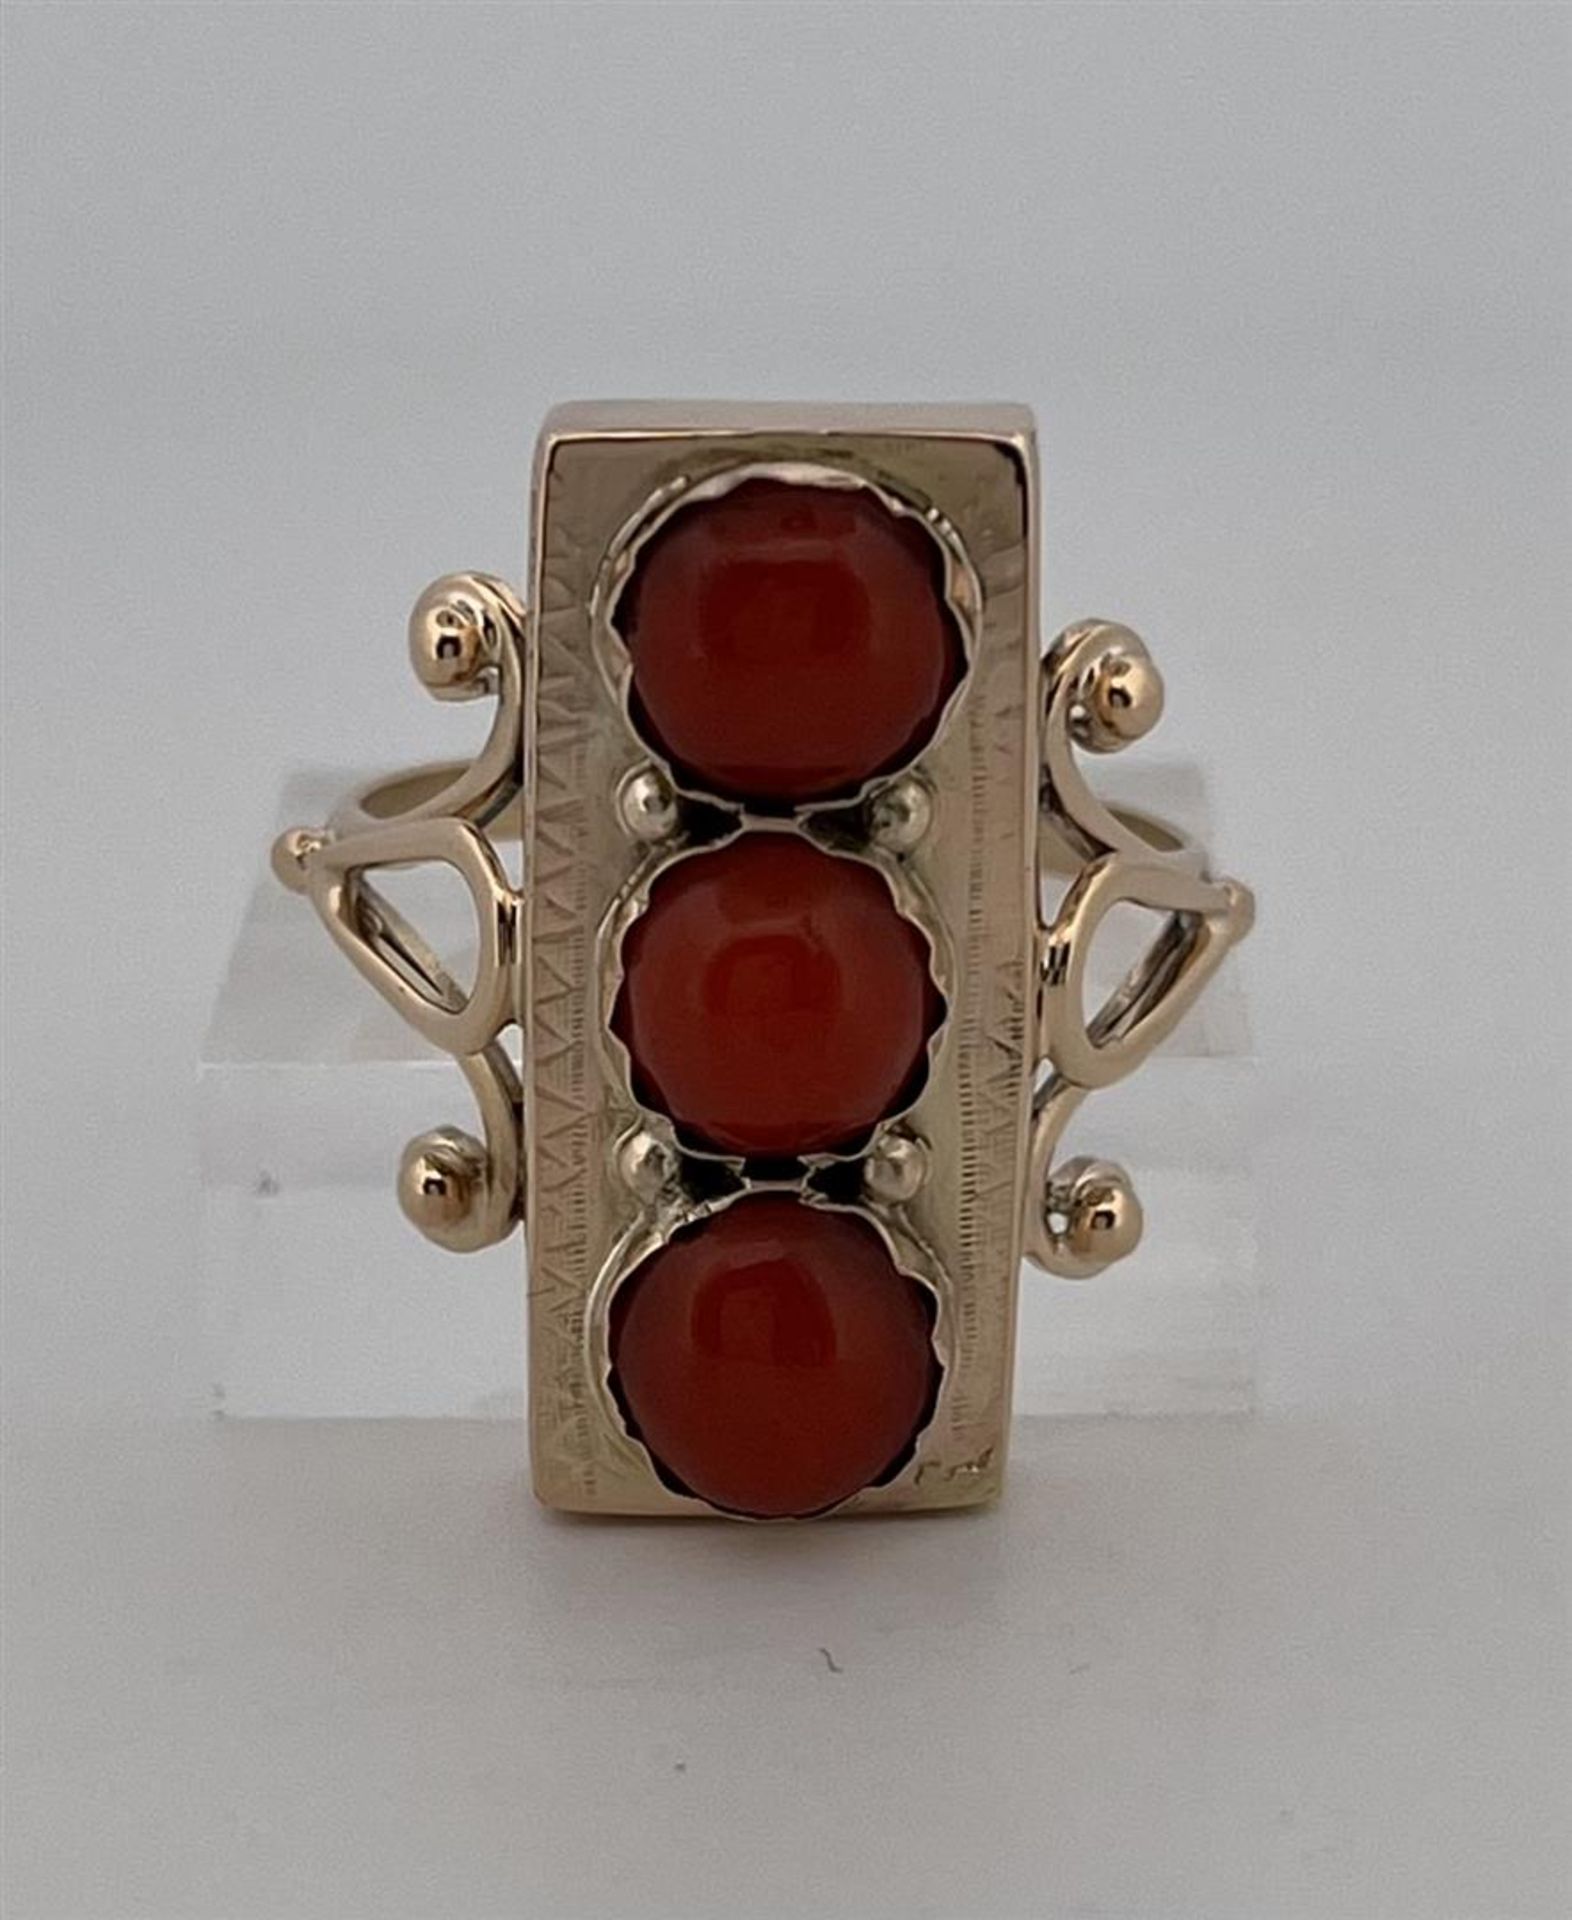 14kt yellow gold 3-stone ring set with red coral.
The ring is set with 3 round cabochon cut red cora